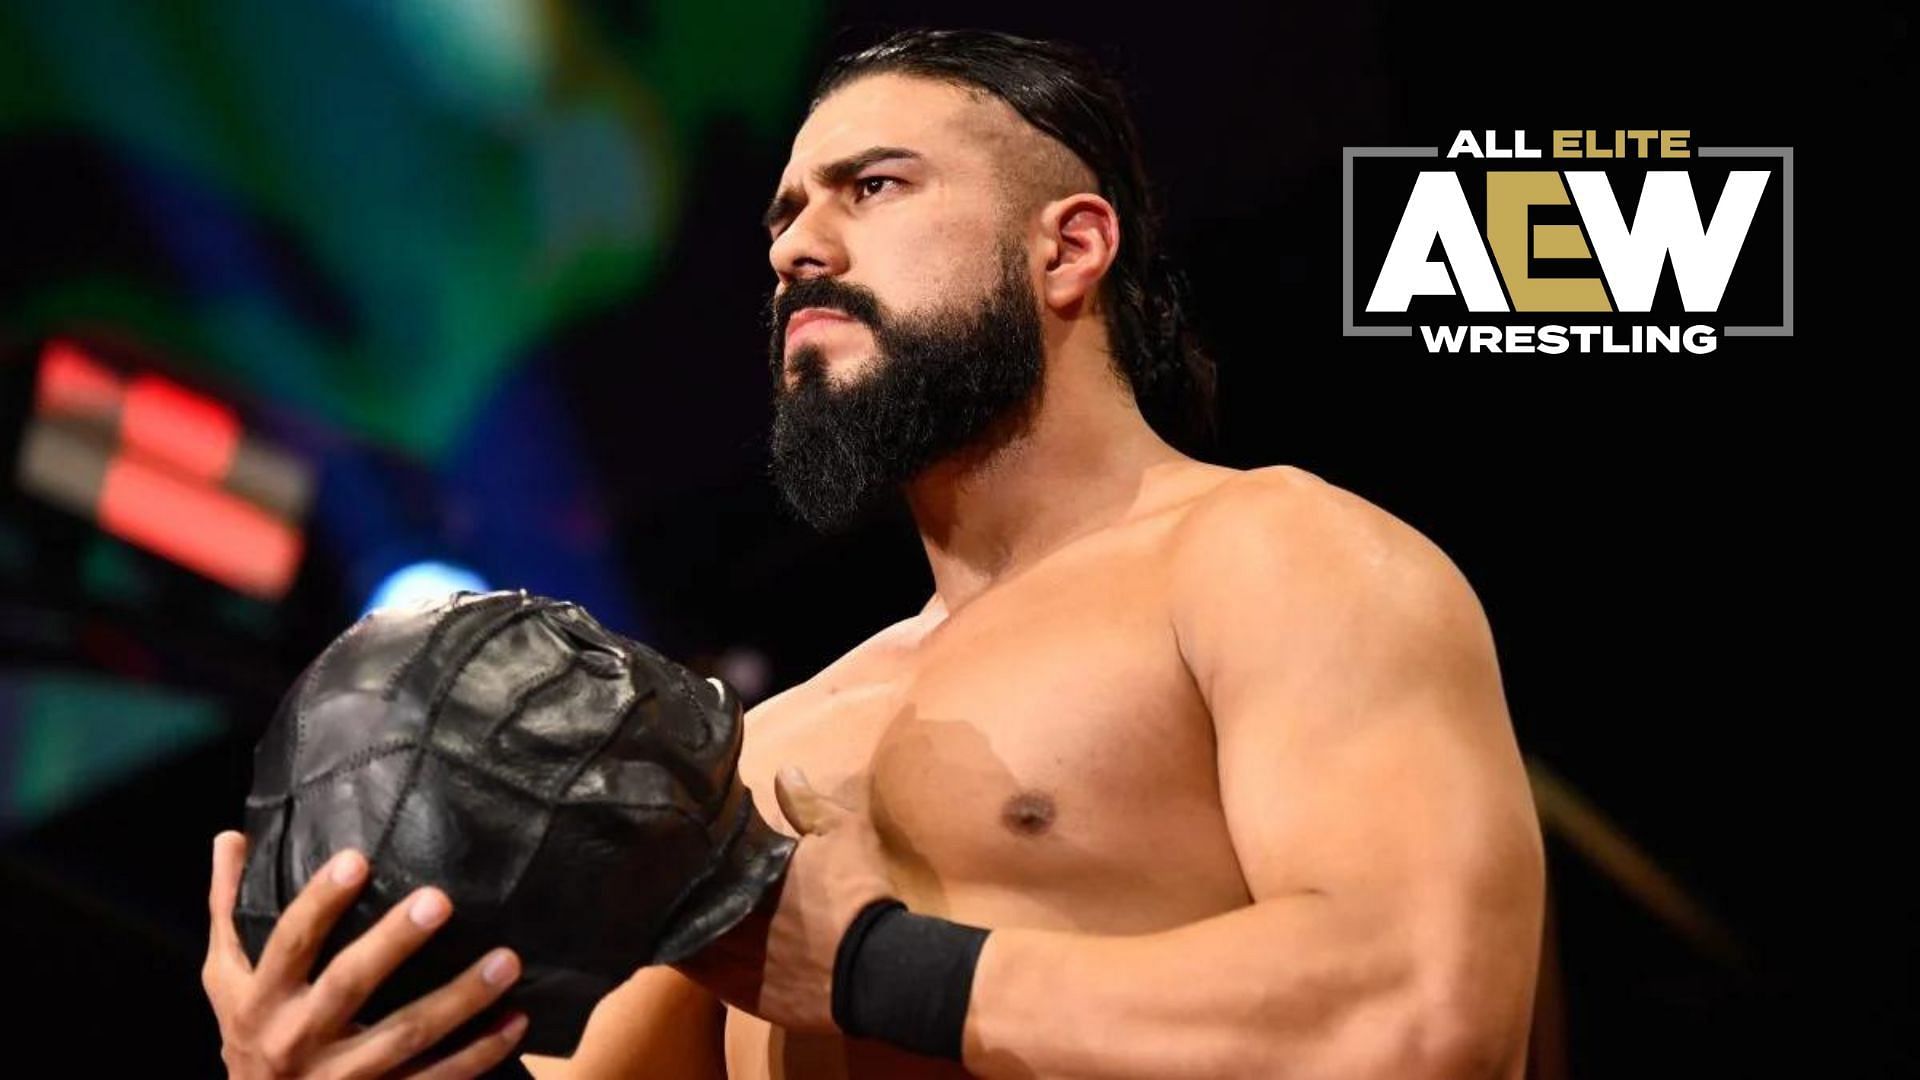 Andrade is former WWE United States Champion